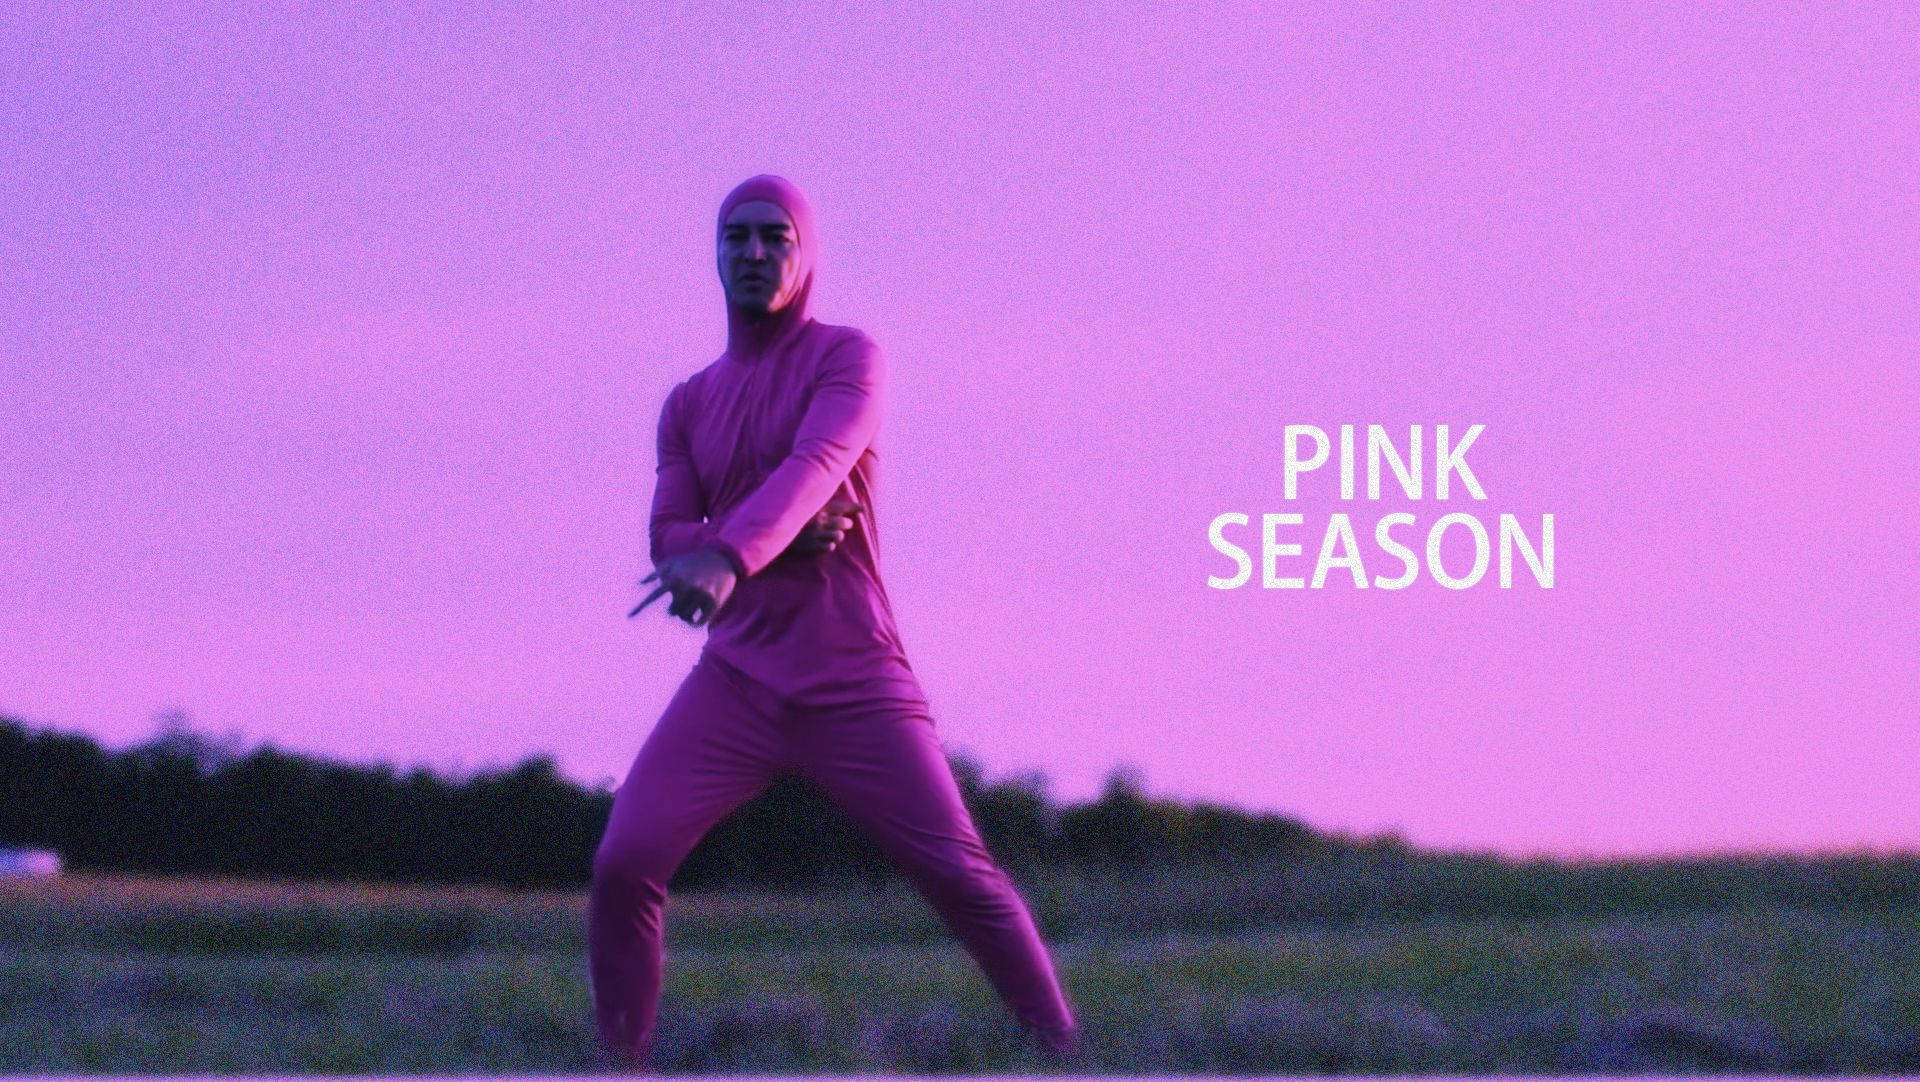 Filthy Frank On A Field Background